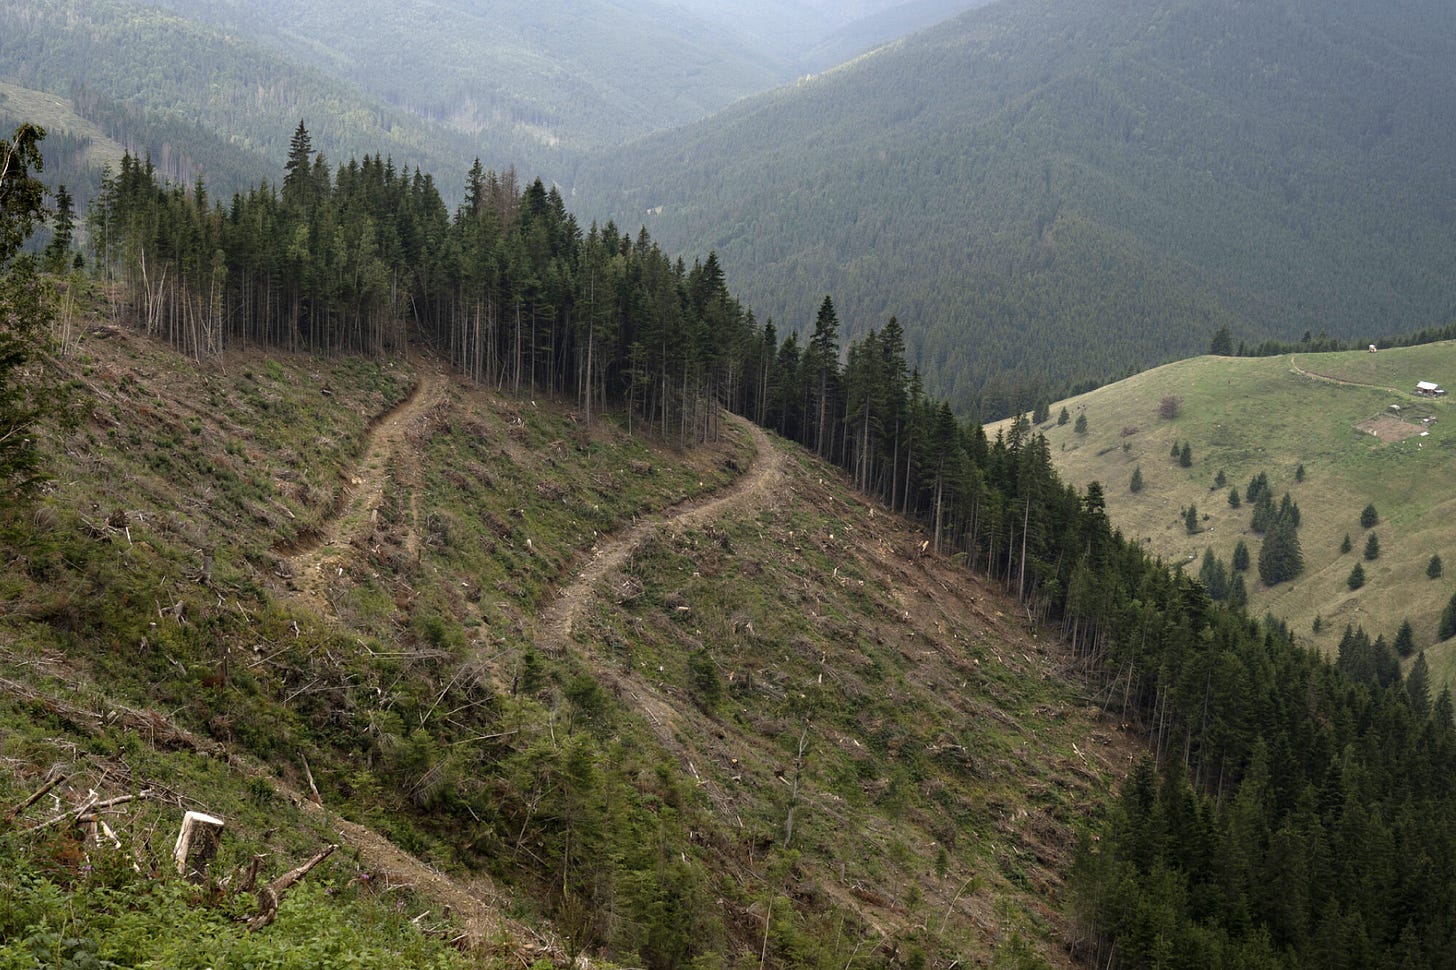 Europe Is Sacrificing Its Ancient Forests for Energy - The New York Times